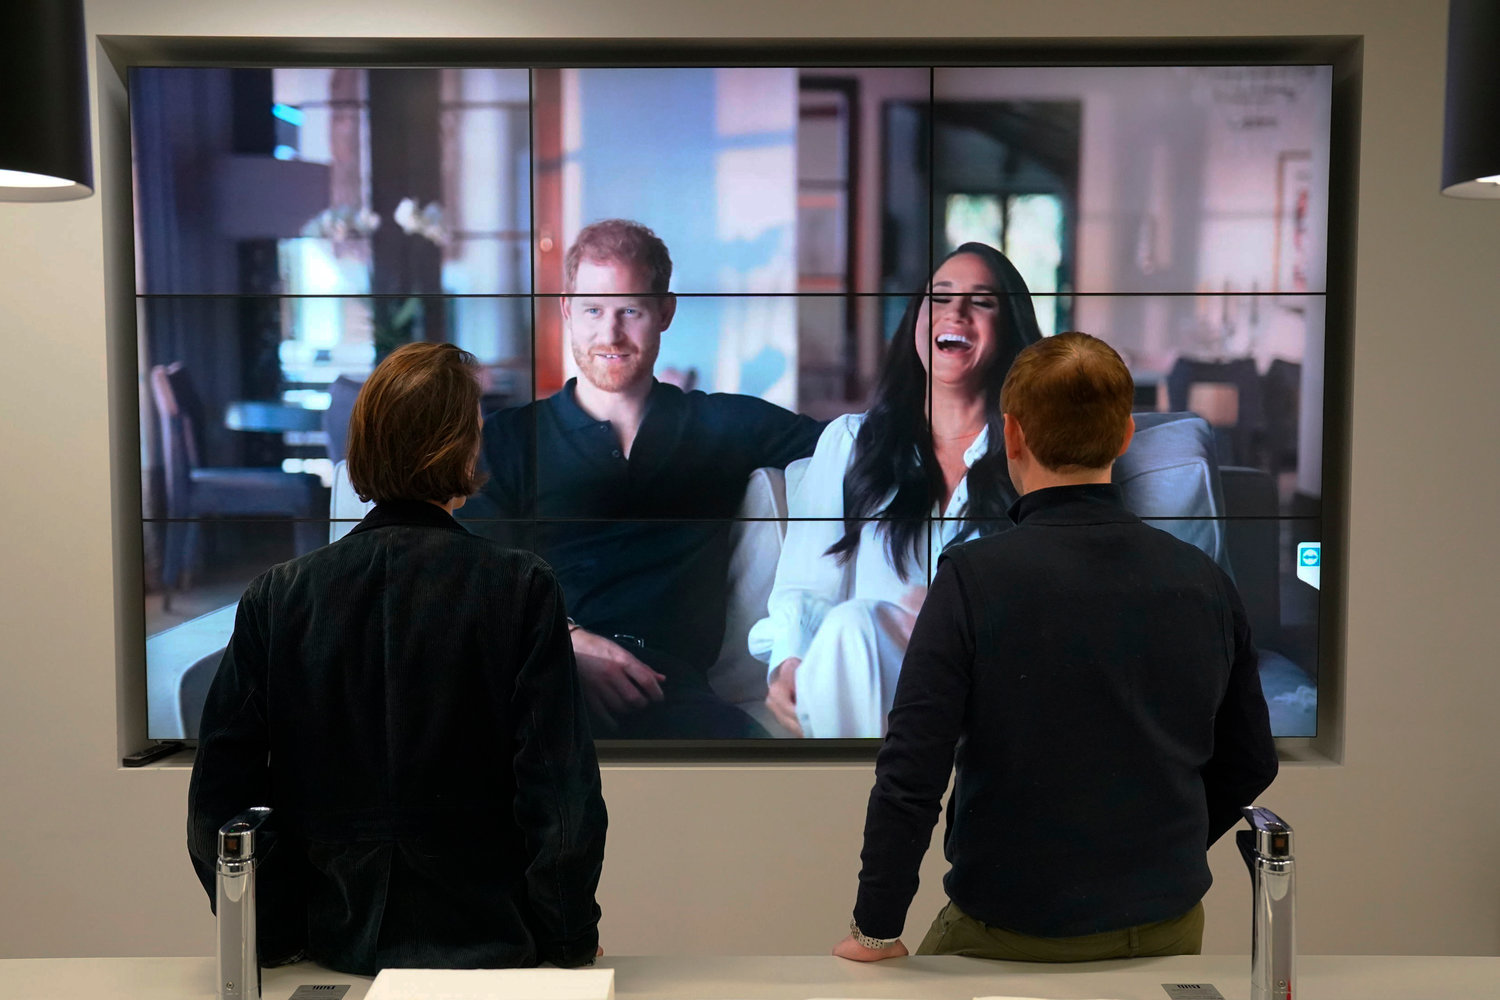 Office workers in London, watch the Duke and Duchess of Sussex's controversial documentary being aired on Netflix Thursday, Dec. 8, 2022. Britain‚Äôs monarchy is bracing for more bombshells to be lobbed over the palace gates as Netflix releases the first three episodes of a new series. The show ‚ÄúHarry &amp; Meghan‚Äù promises to tell the ‚Äúfull truth‚Äù about Prince Harry and his wife Meghan‚Äôs estrangement from the royal family. The series debuted Thursday. (Jonathan Brady/PA via AP)